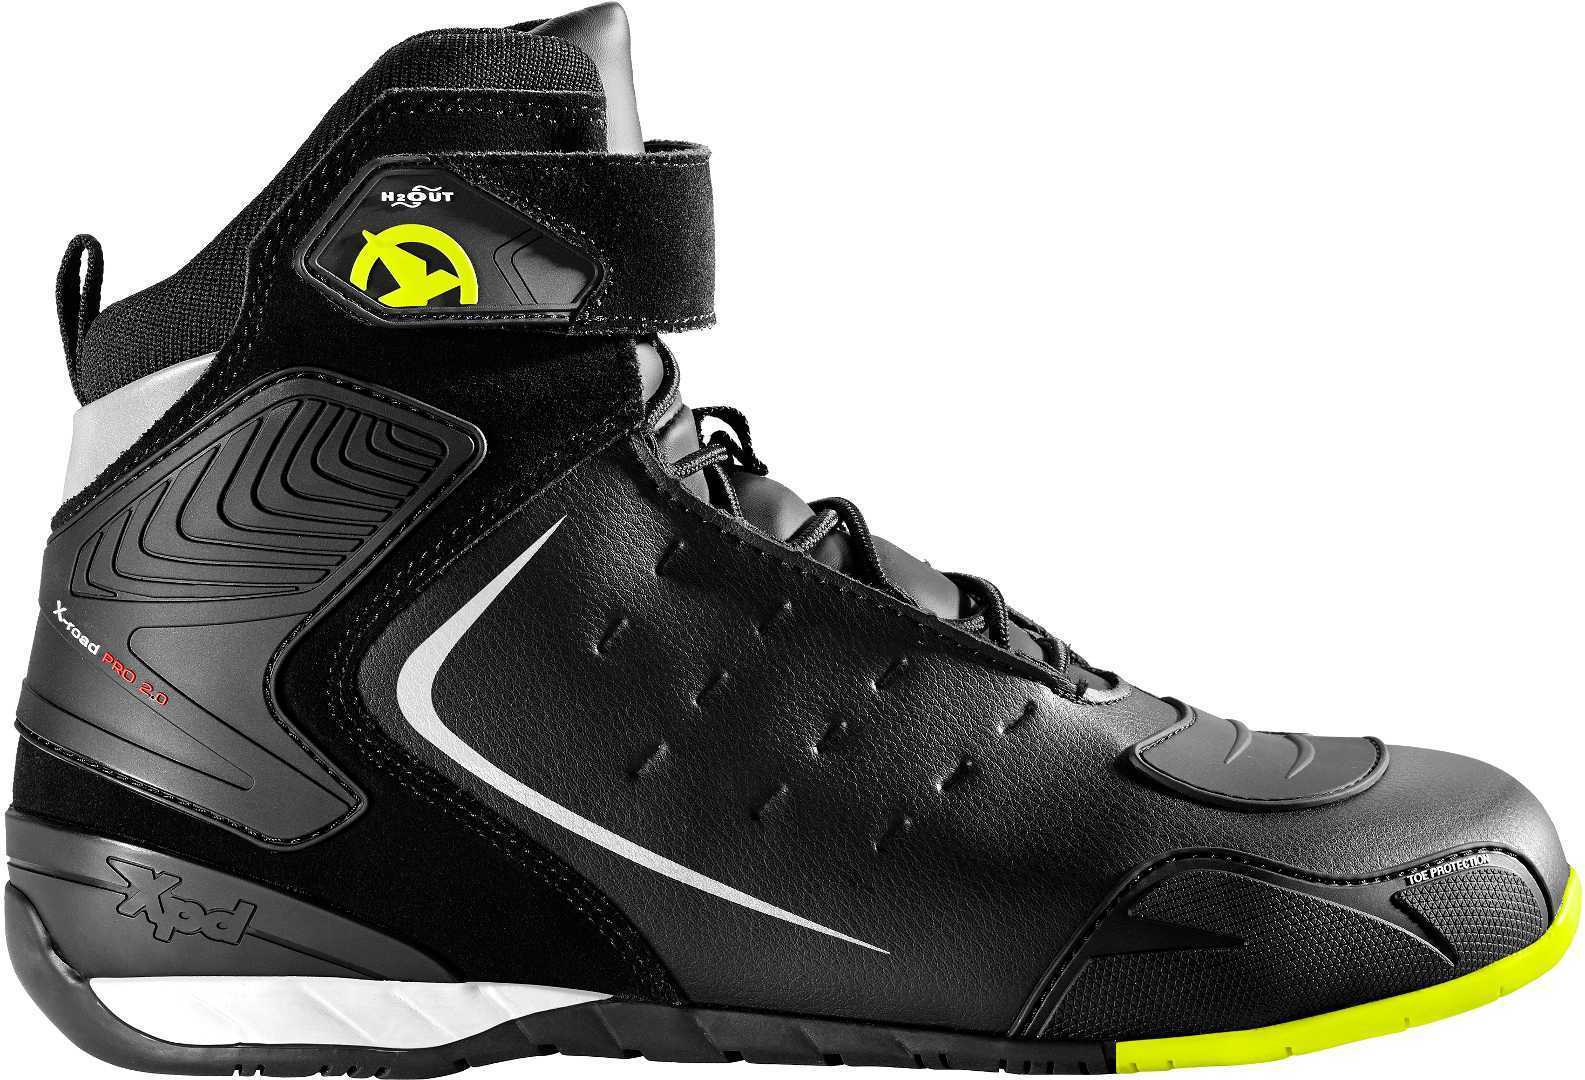 Image of EU XPD X-Road H2Out Jaune Fluo Chaussures Taille 40